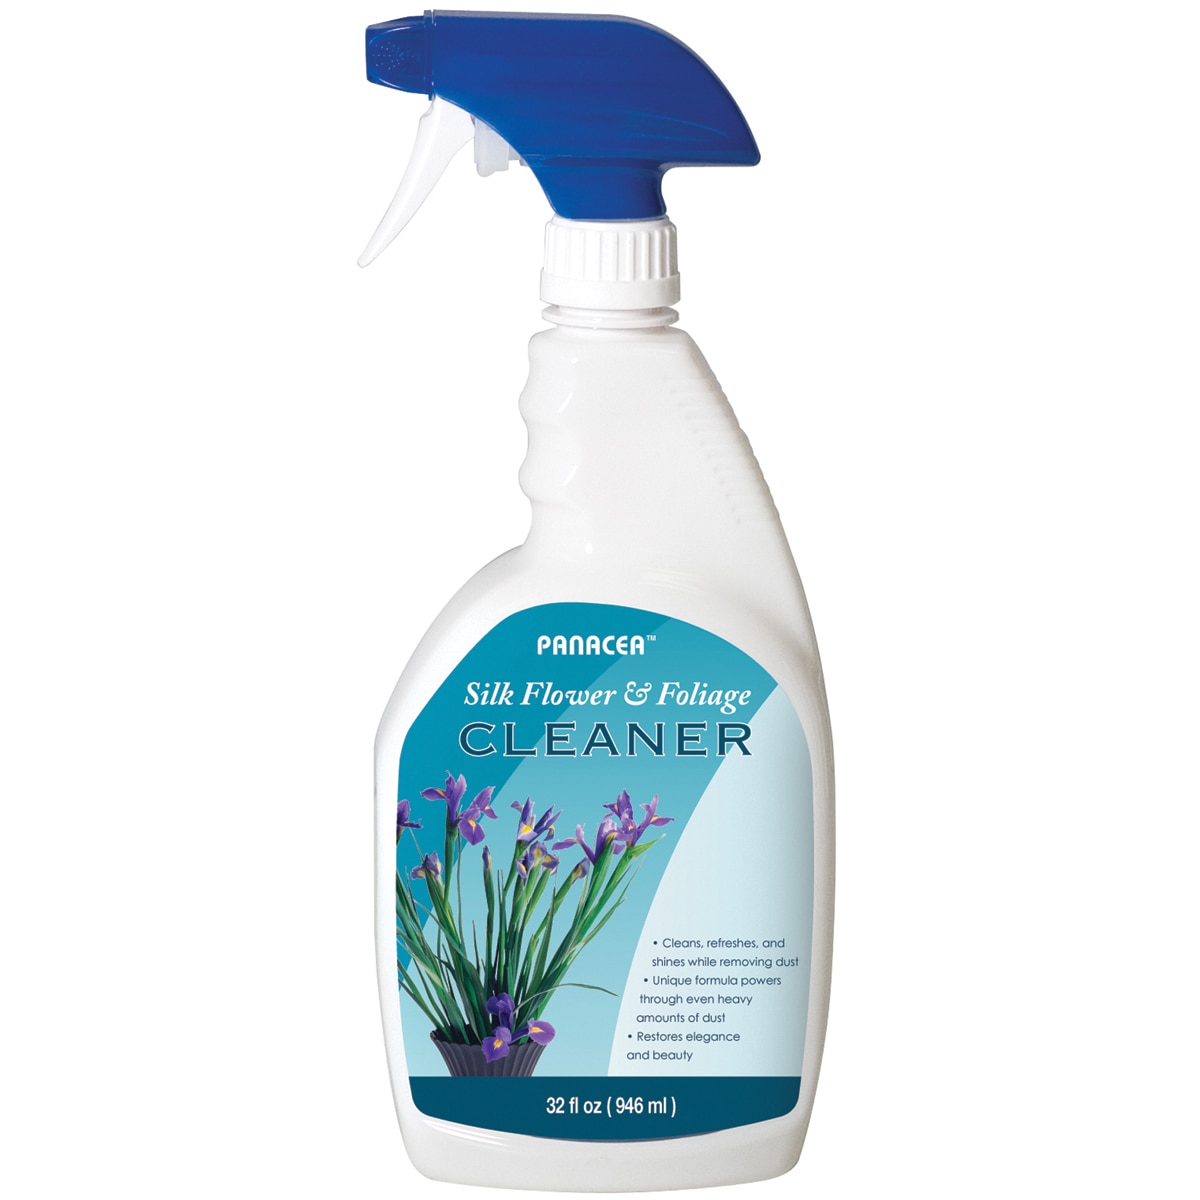 Artificial plant cleaner information